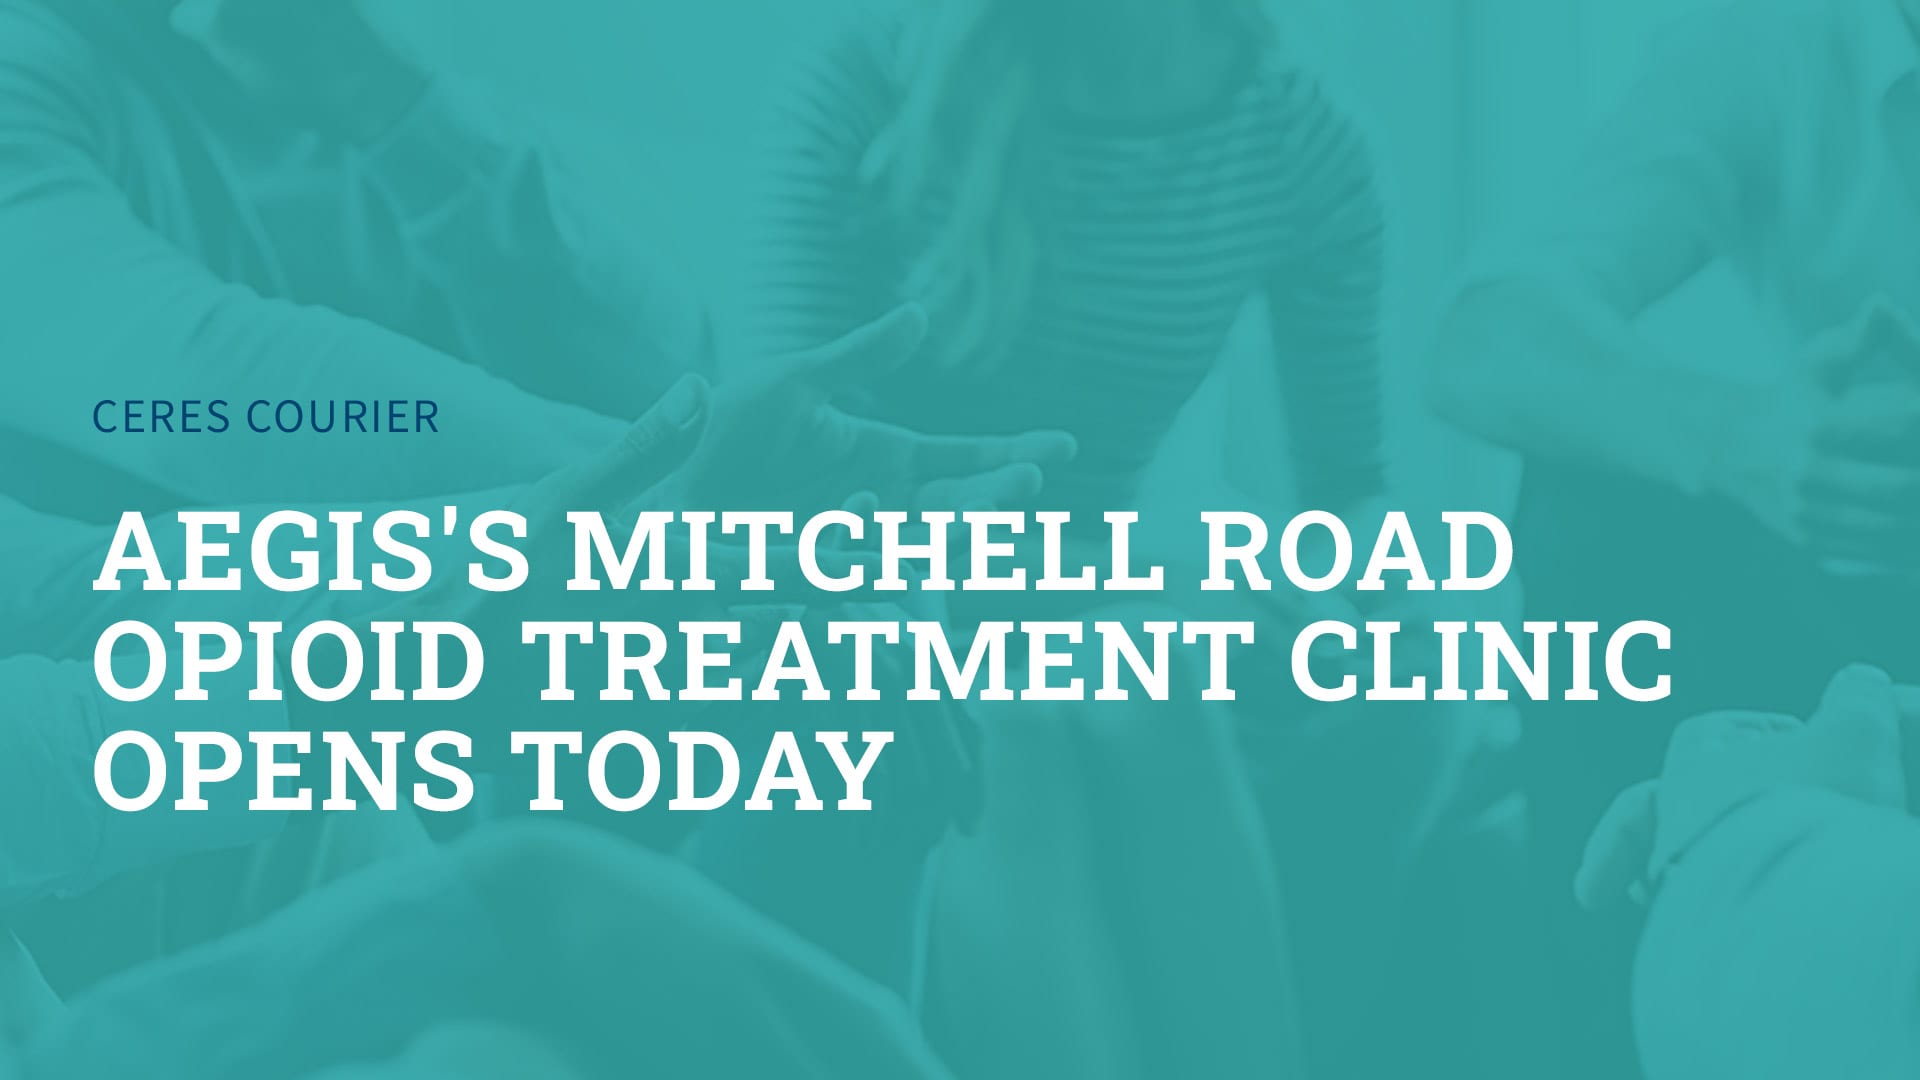 Aegis’s Mitchell Road Opioid Treatment Clinic Opens